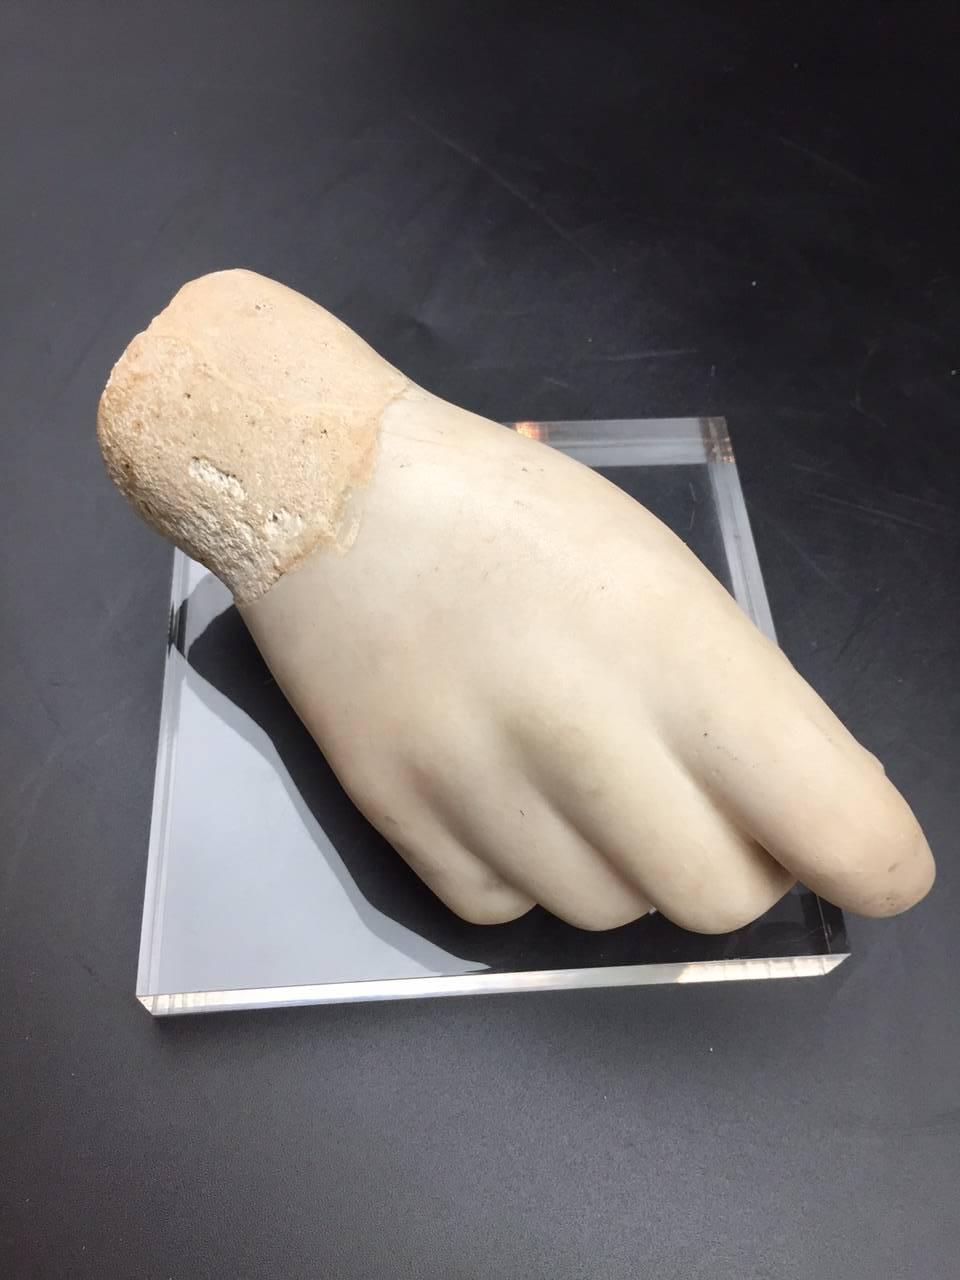 Beautifully sculpted French 19th century marble hand most probably part of a larger sculpture presented on a Lucite base. Visible restorations and breaks with the small and fourth fingertips missing but overall a fine piece.